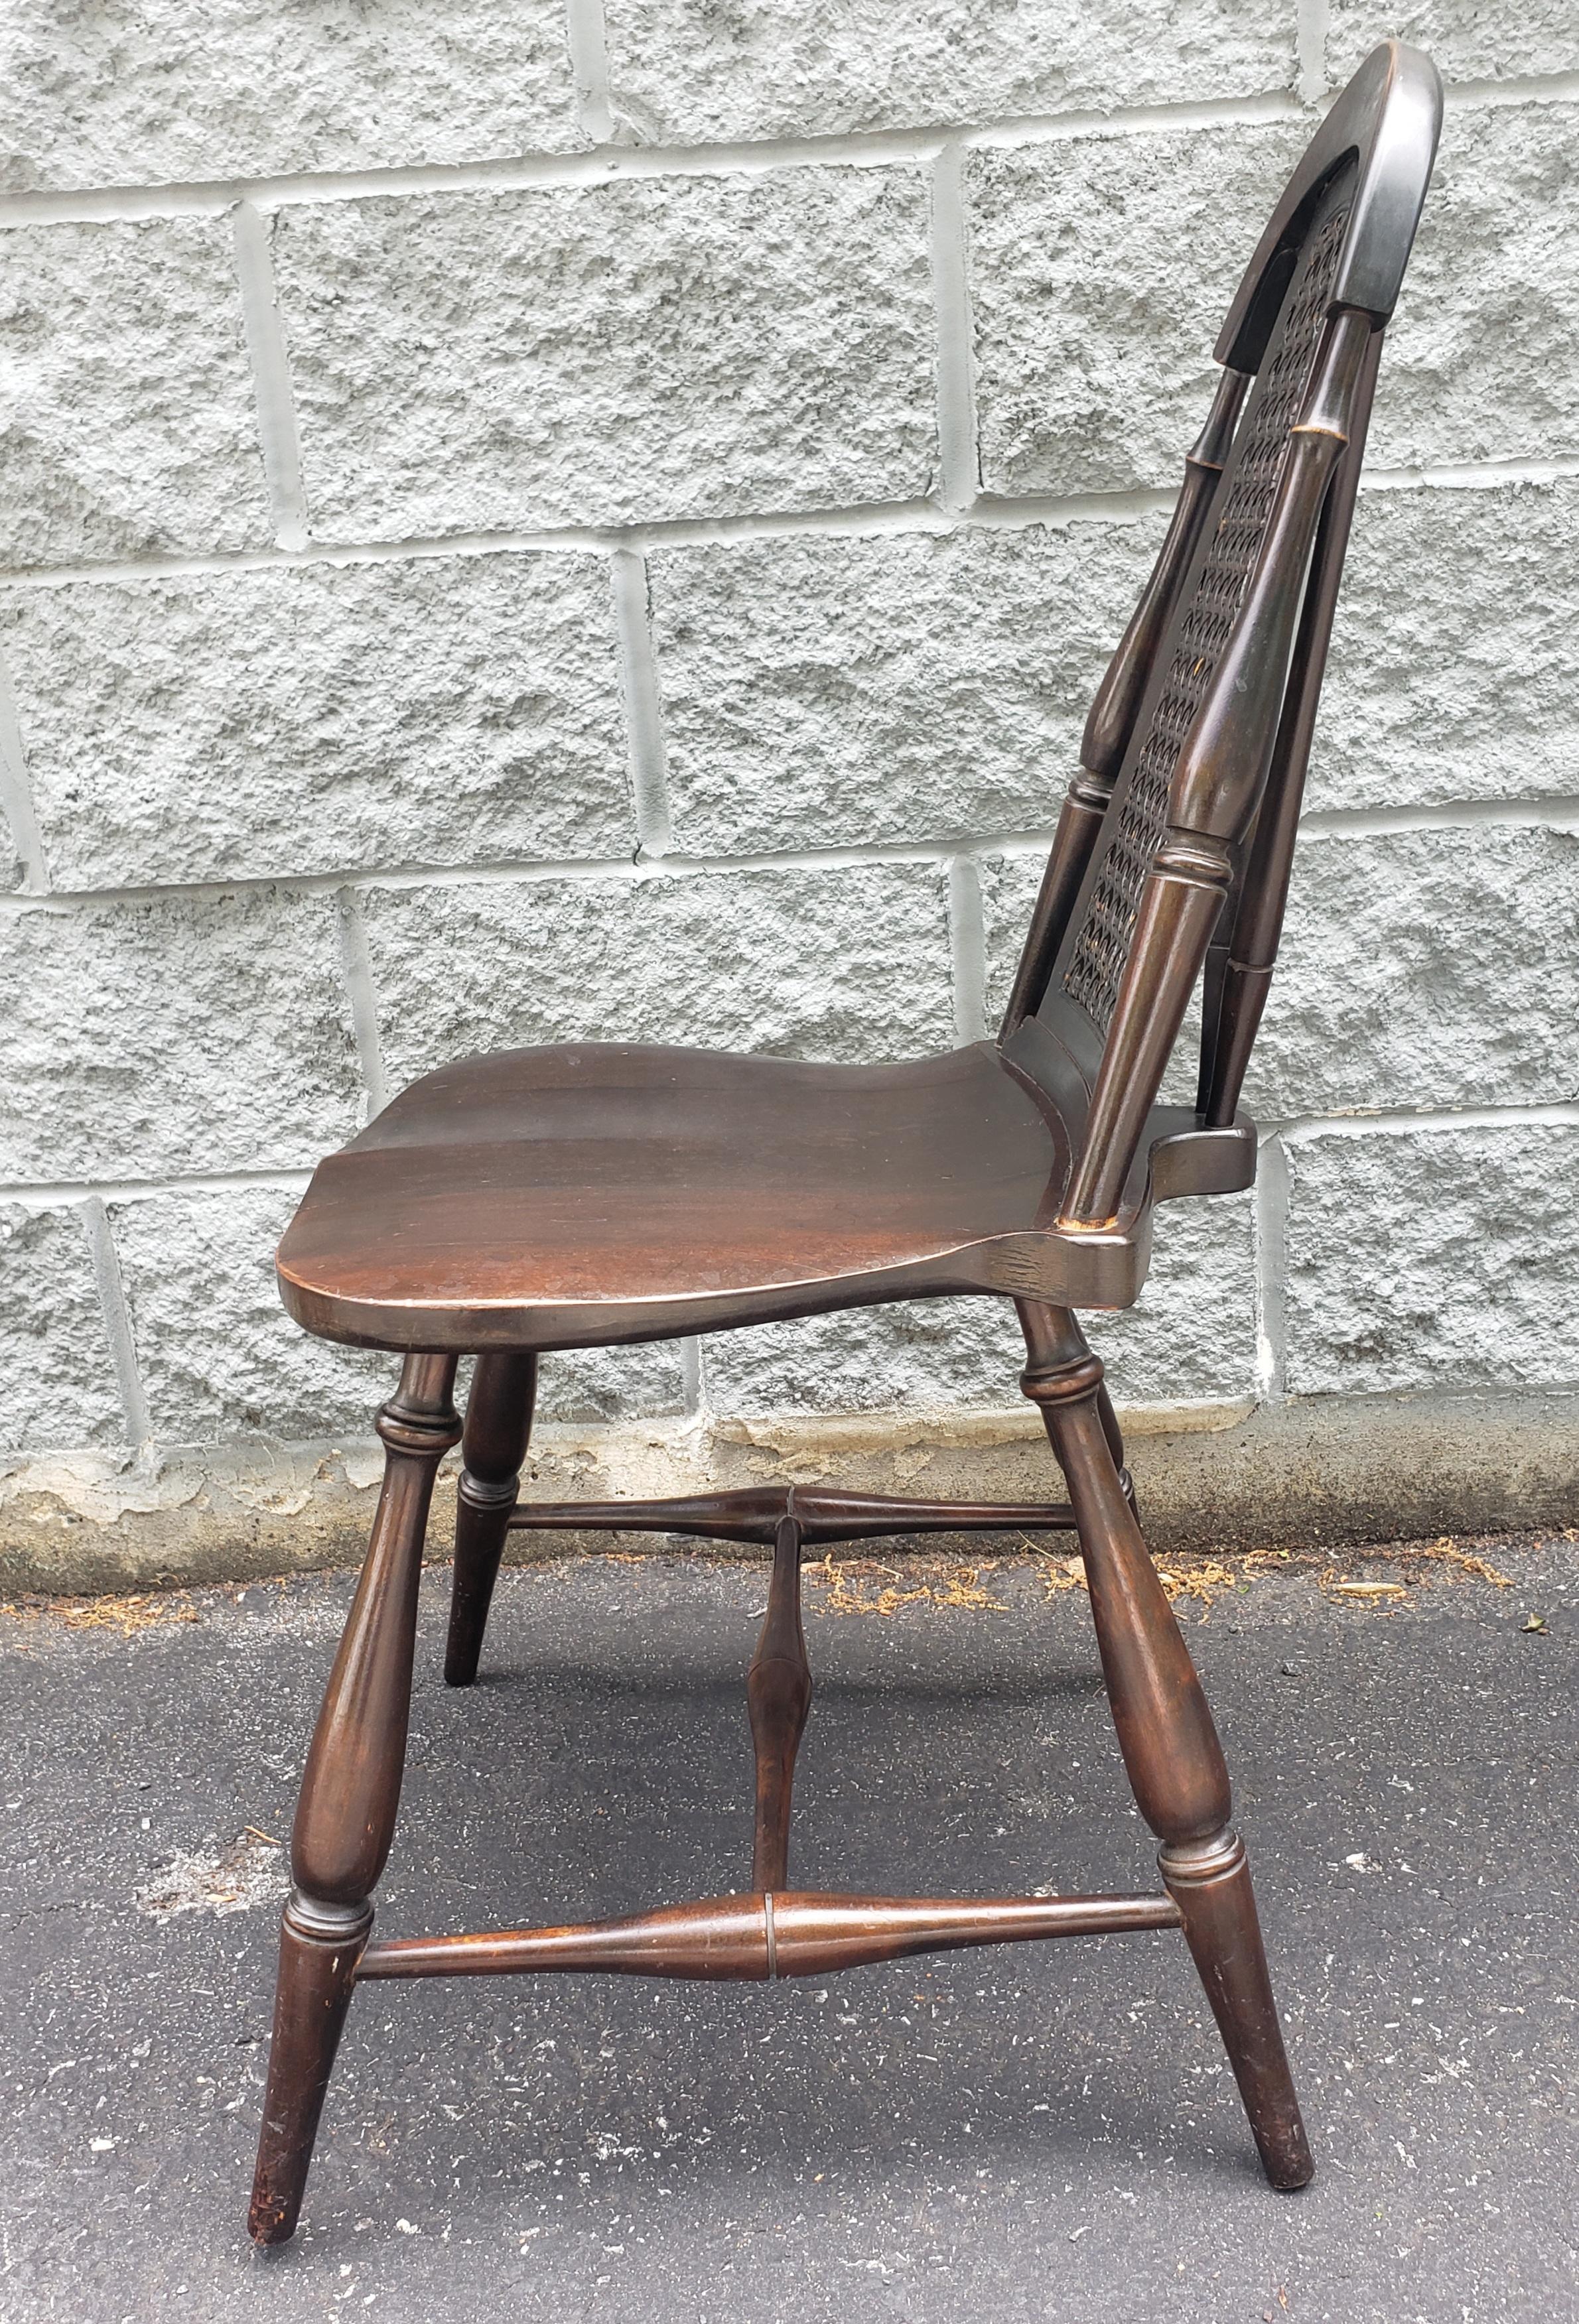 Rare 1940s Walnut and Cane Brace Back Windsor Chair In Good Condition For Sale In Germantown, MD